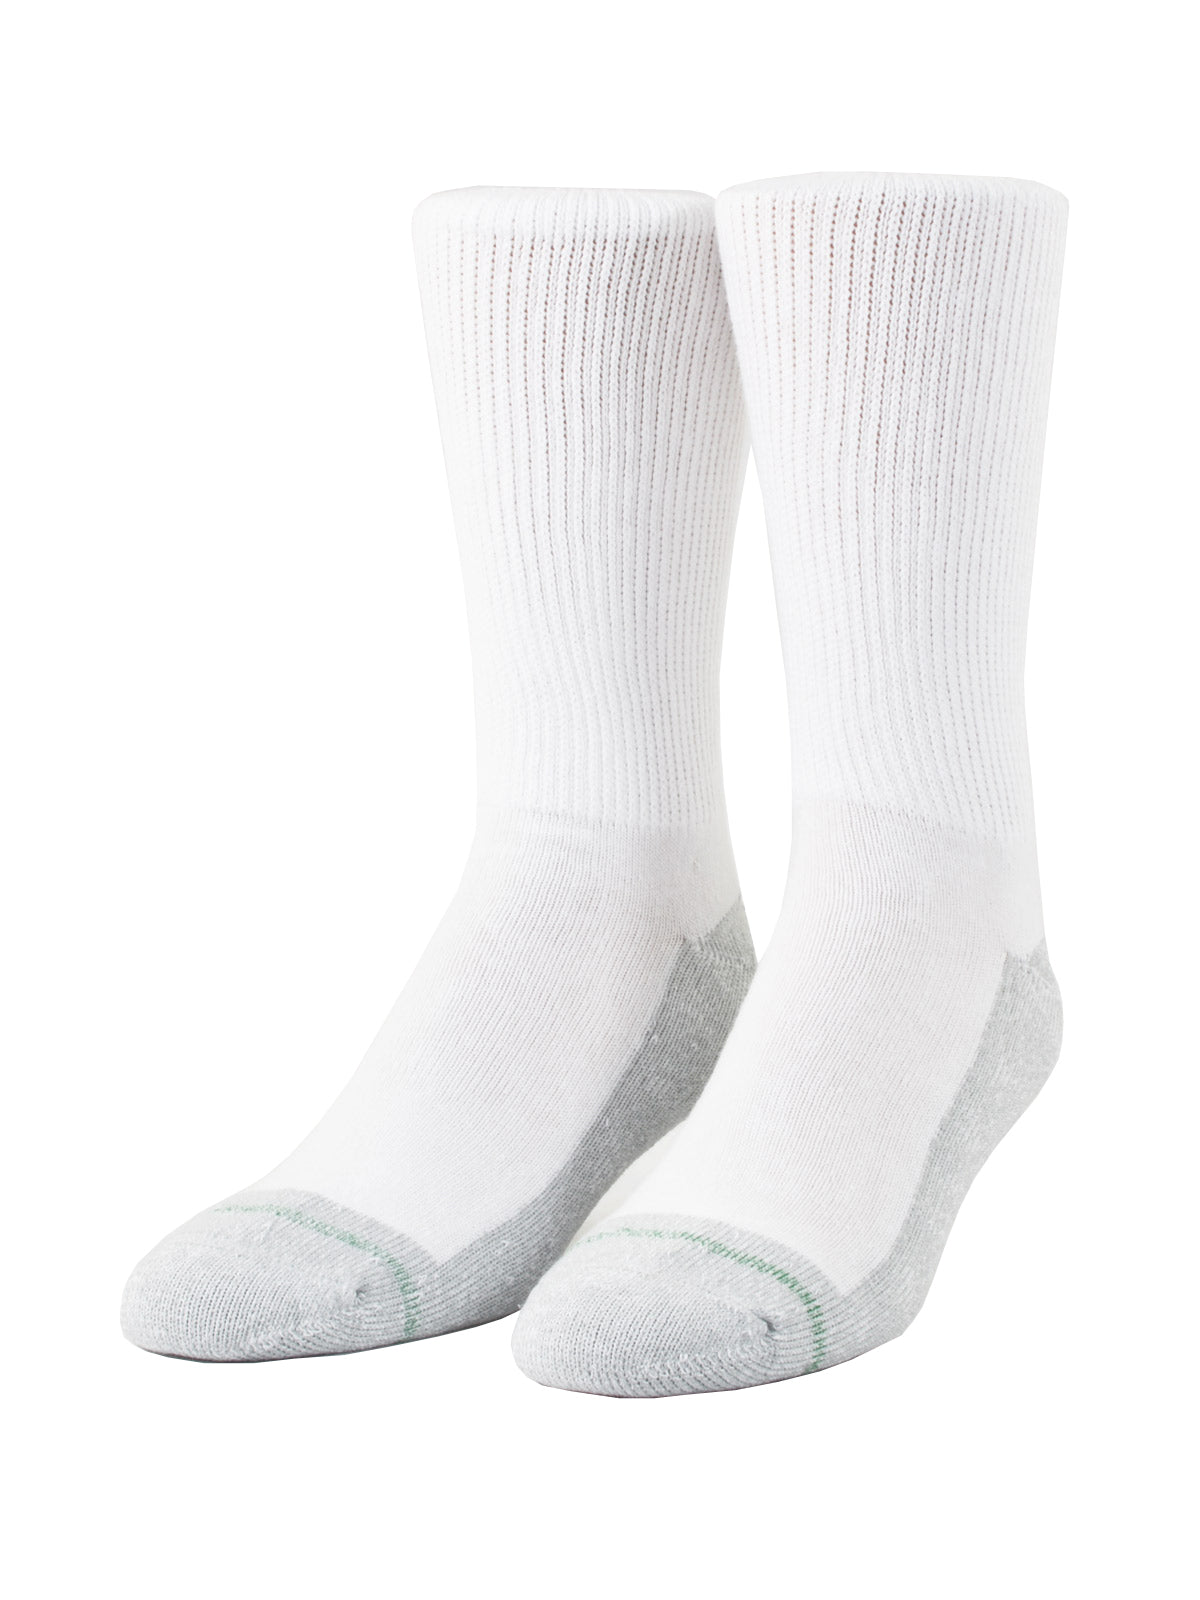 Loose Fit Stays Up Crew Athletic Socks in White - Small (Size 5 - 8) - 770